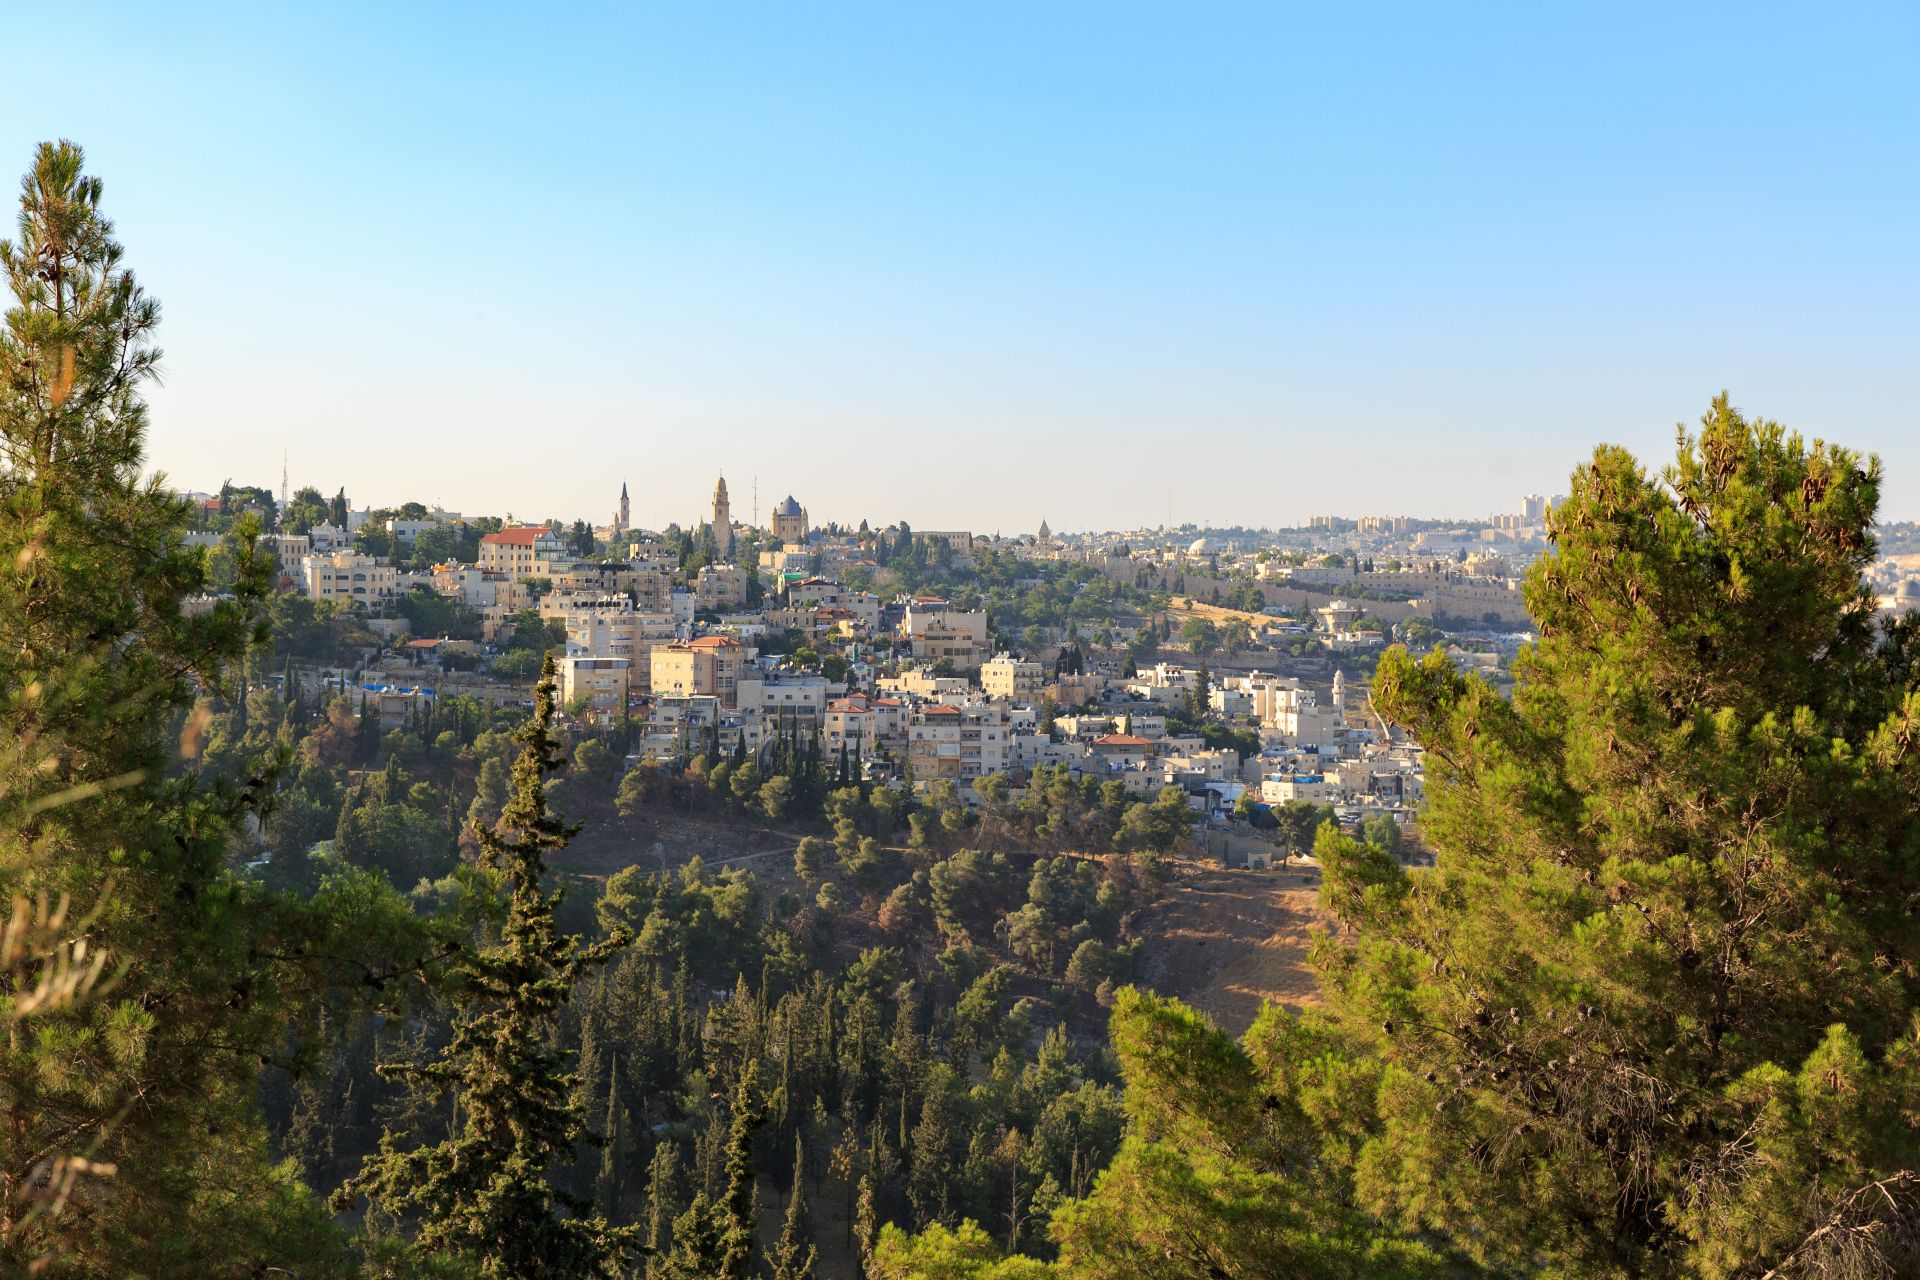 ISRAEL View on mount Zion, Dormitsion abbey and church in Jerusalem